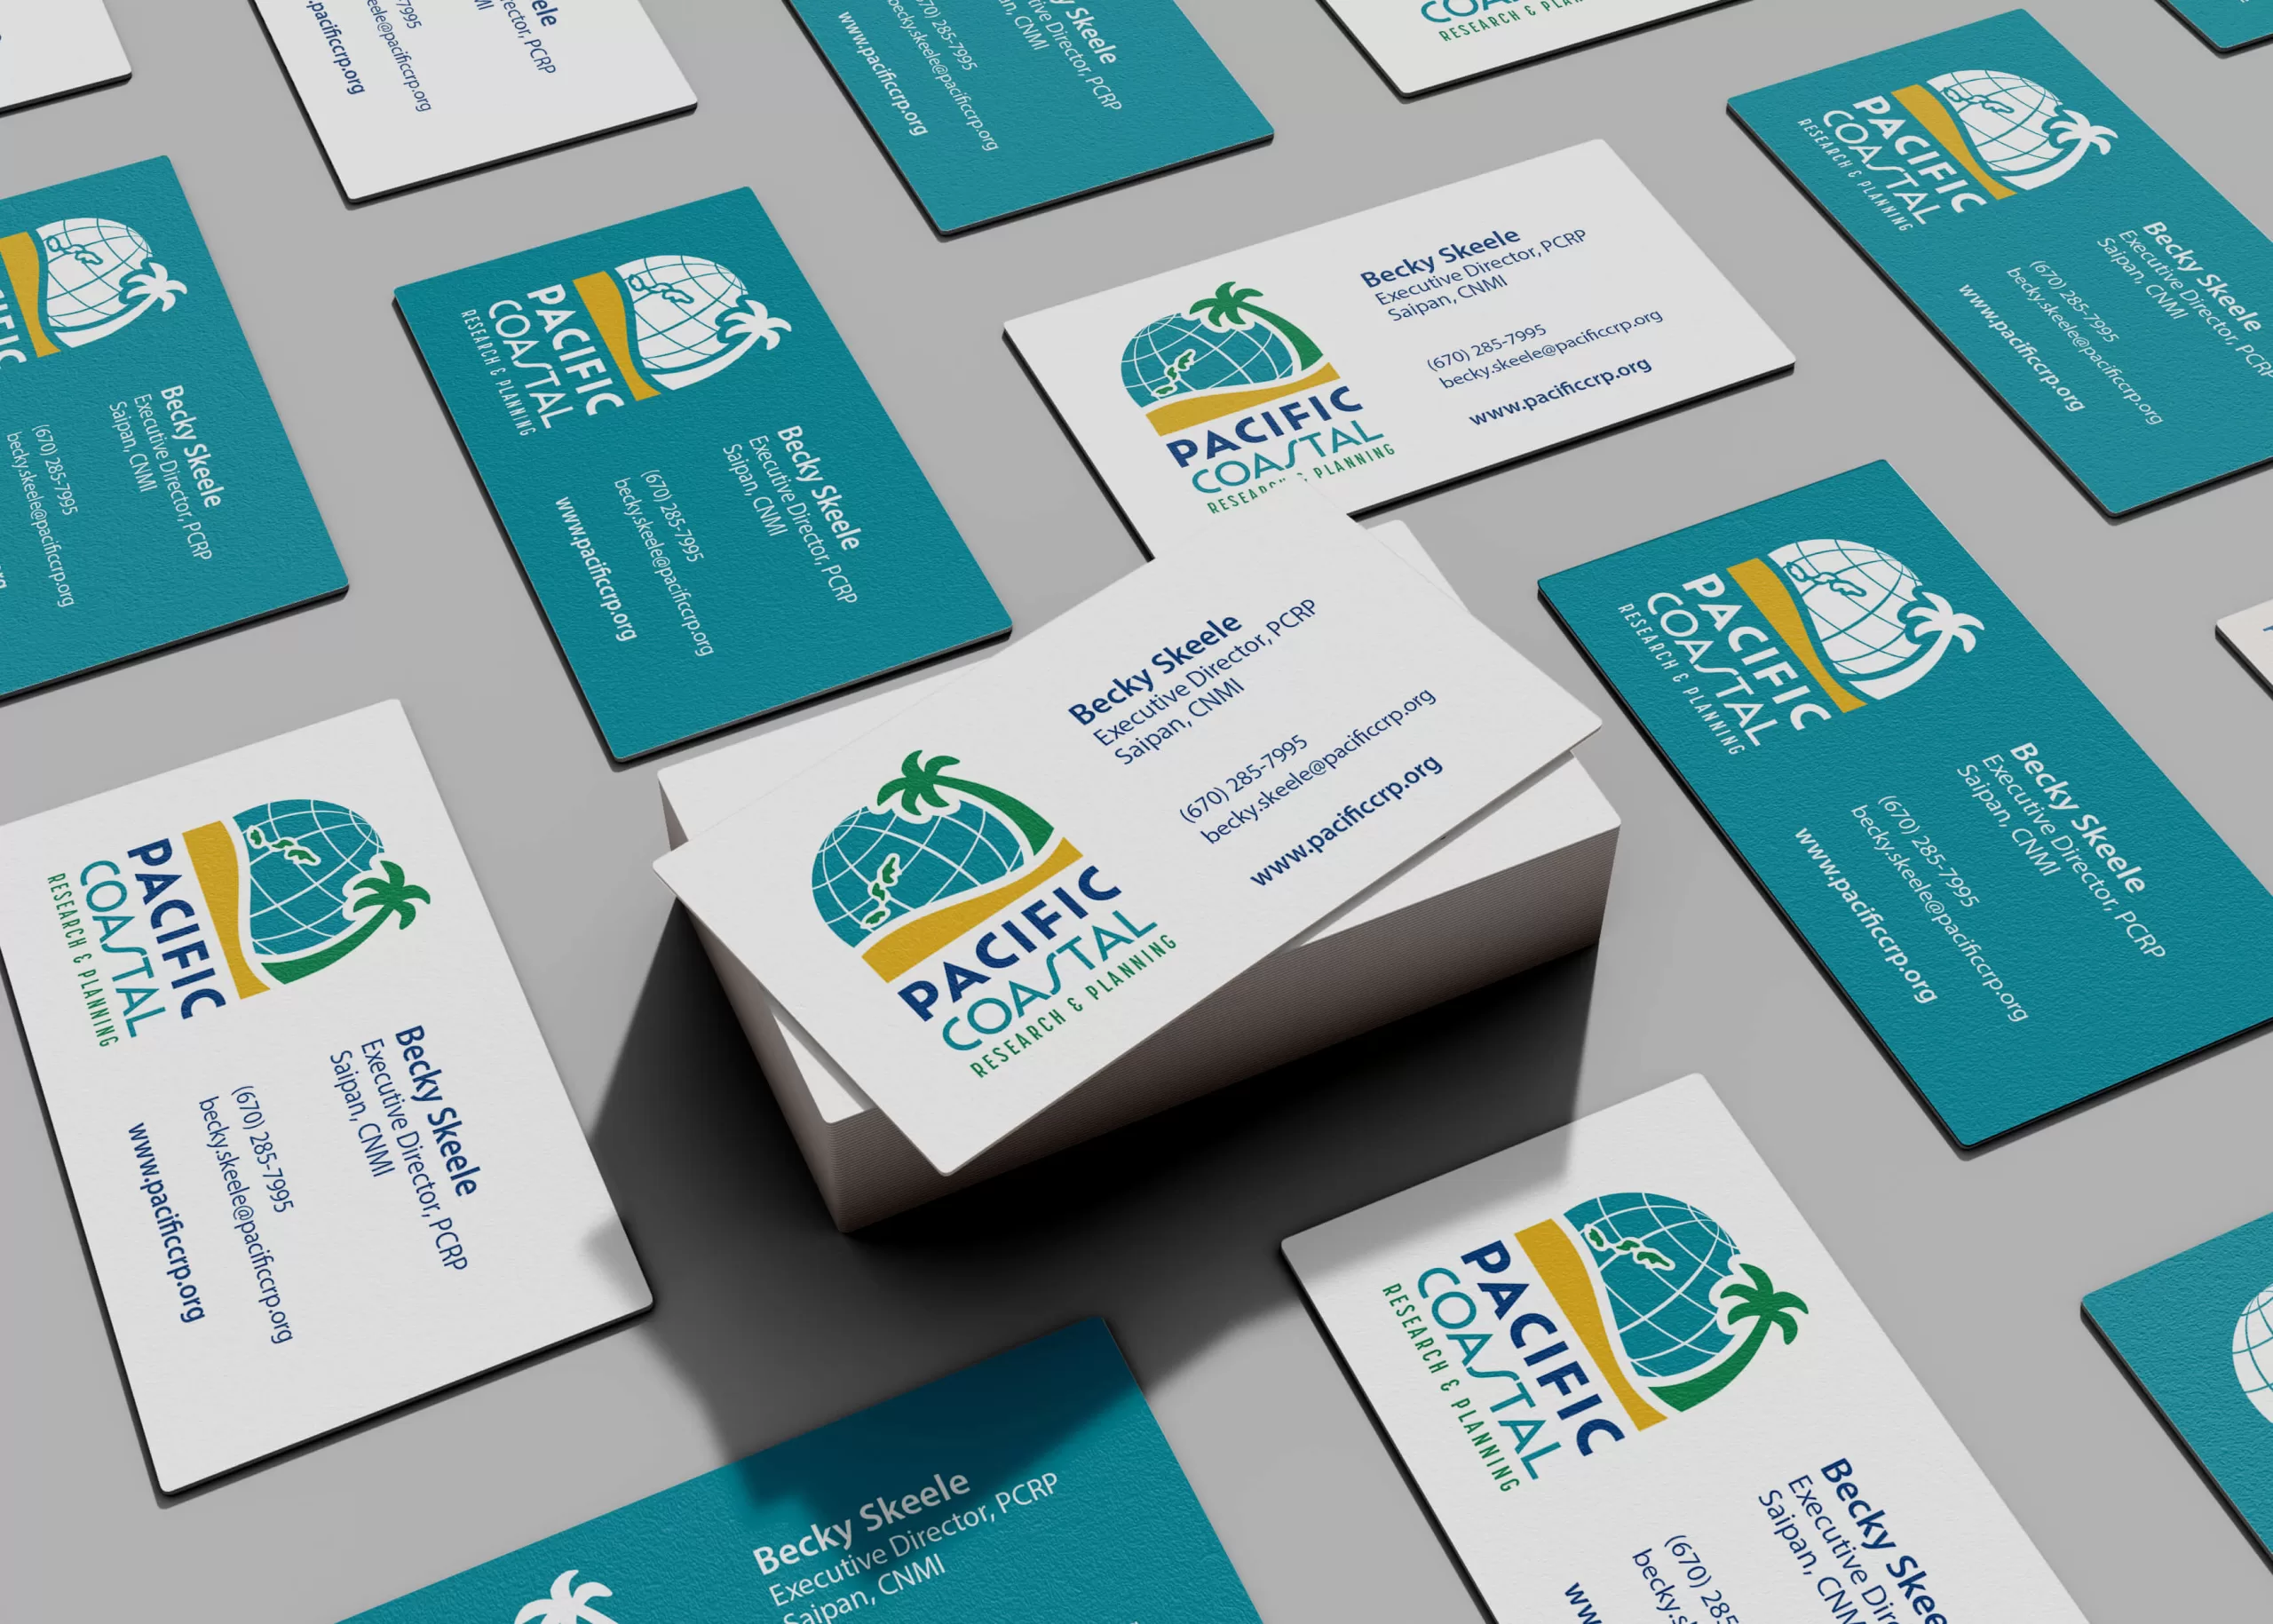 Business card mockup for an environmental planning firm in the South Pacific.